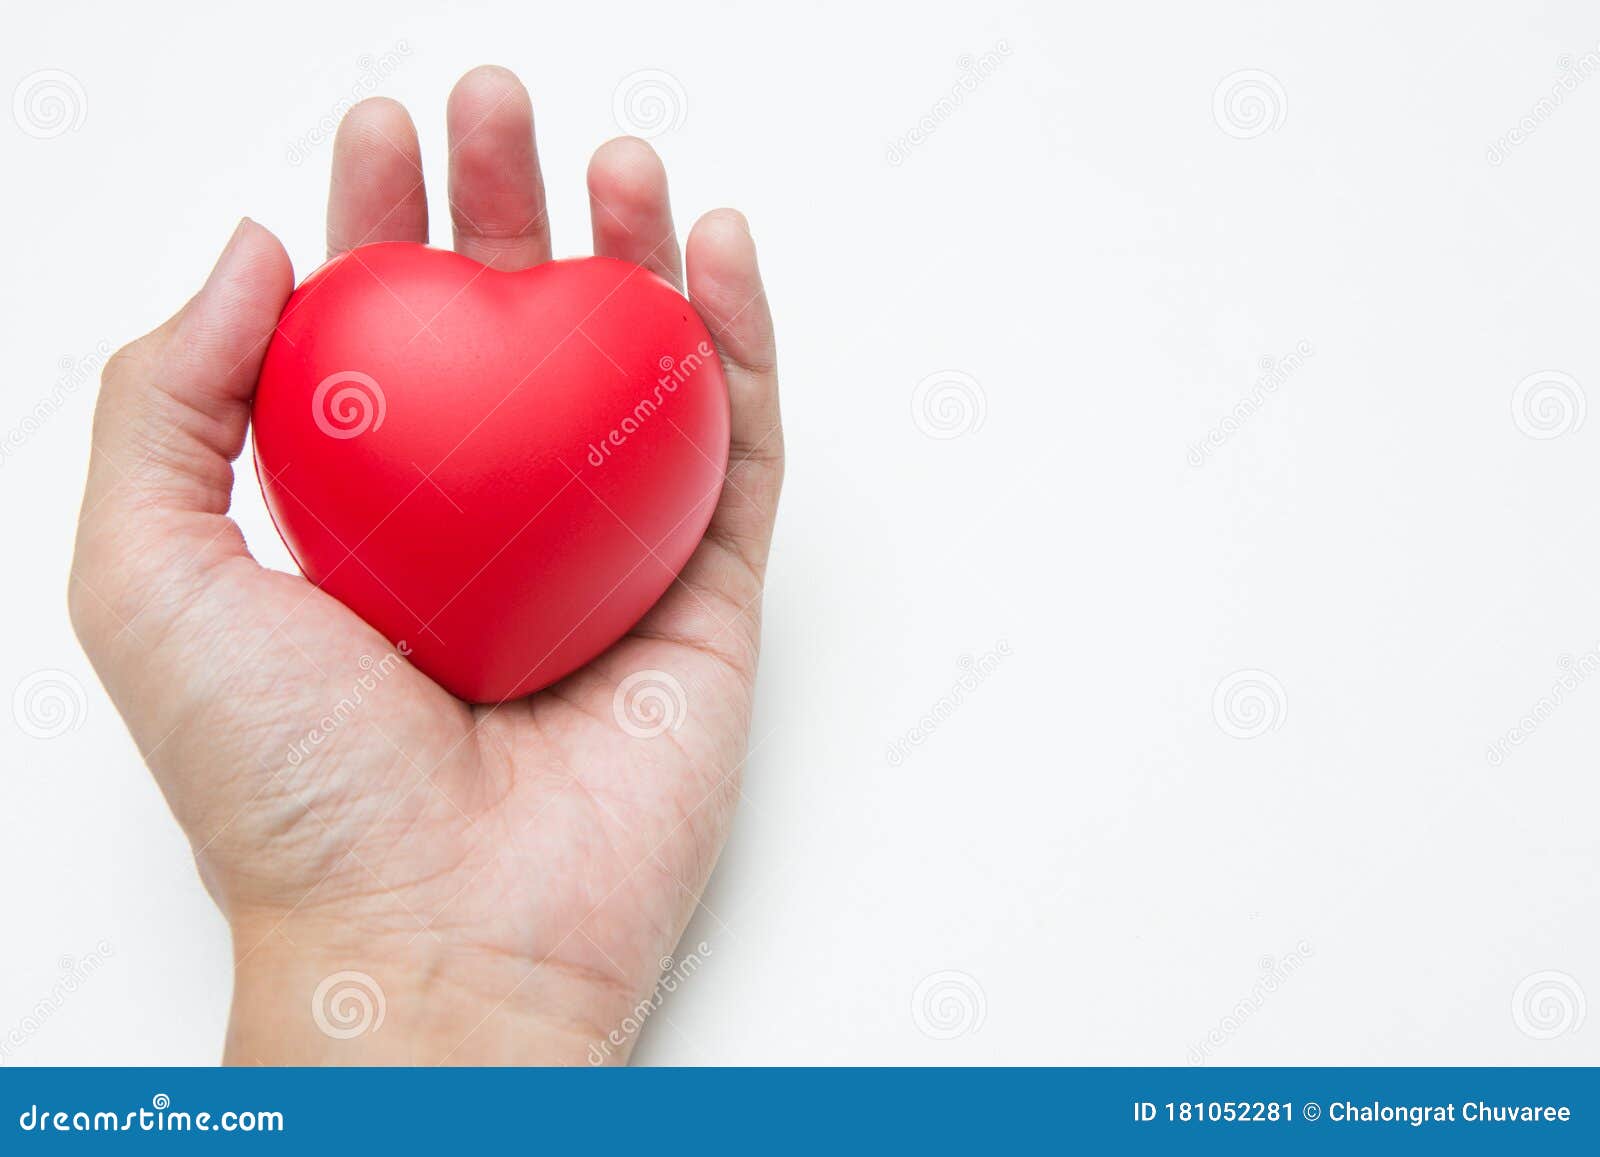 https://thumbs.dreamstime.com/z/hand-holding-heart-shaped-squeeze-ball-muscle-exercise-white-background-copy-space-181052281.jpg